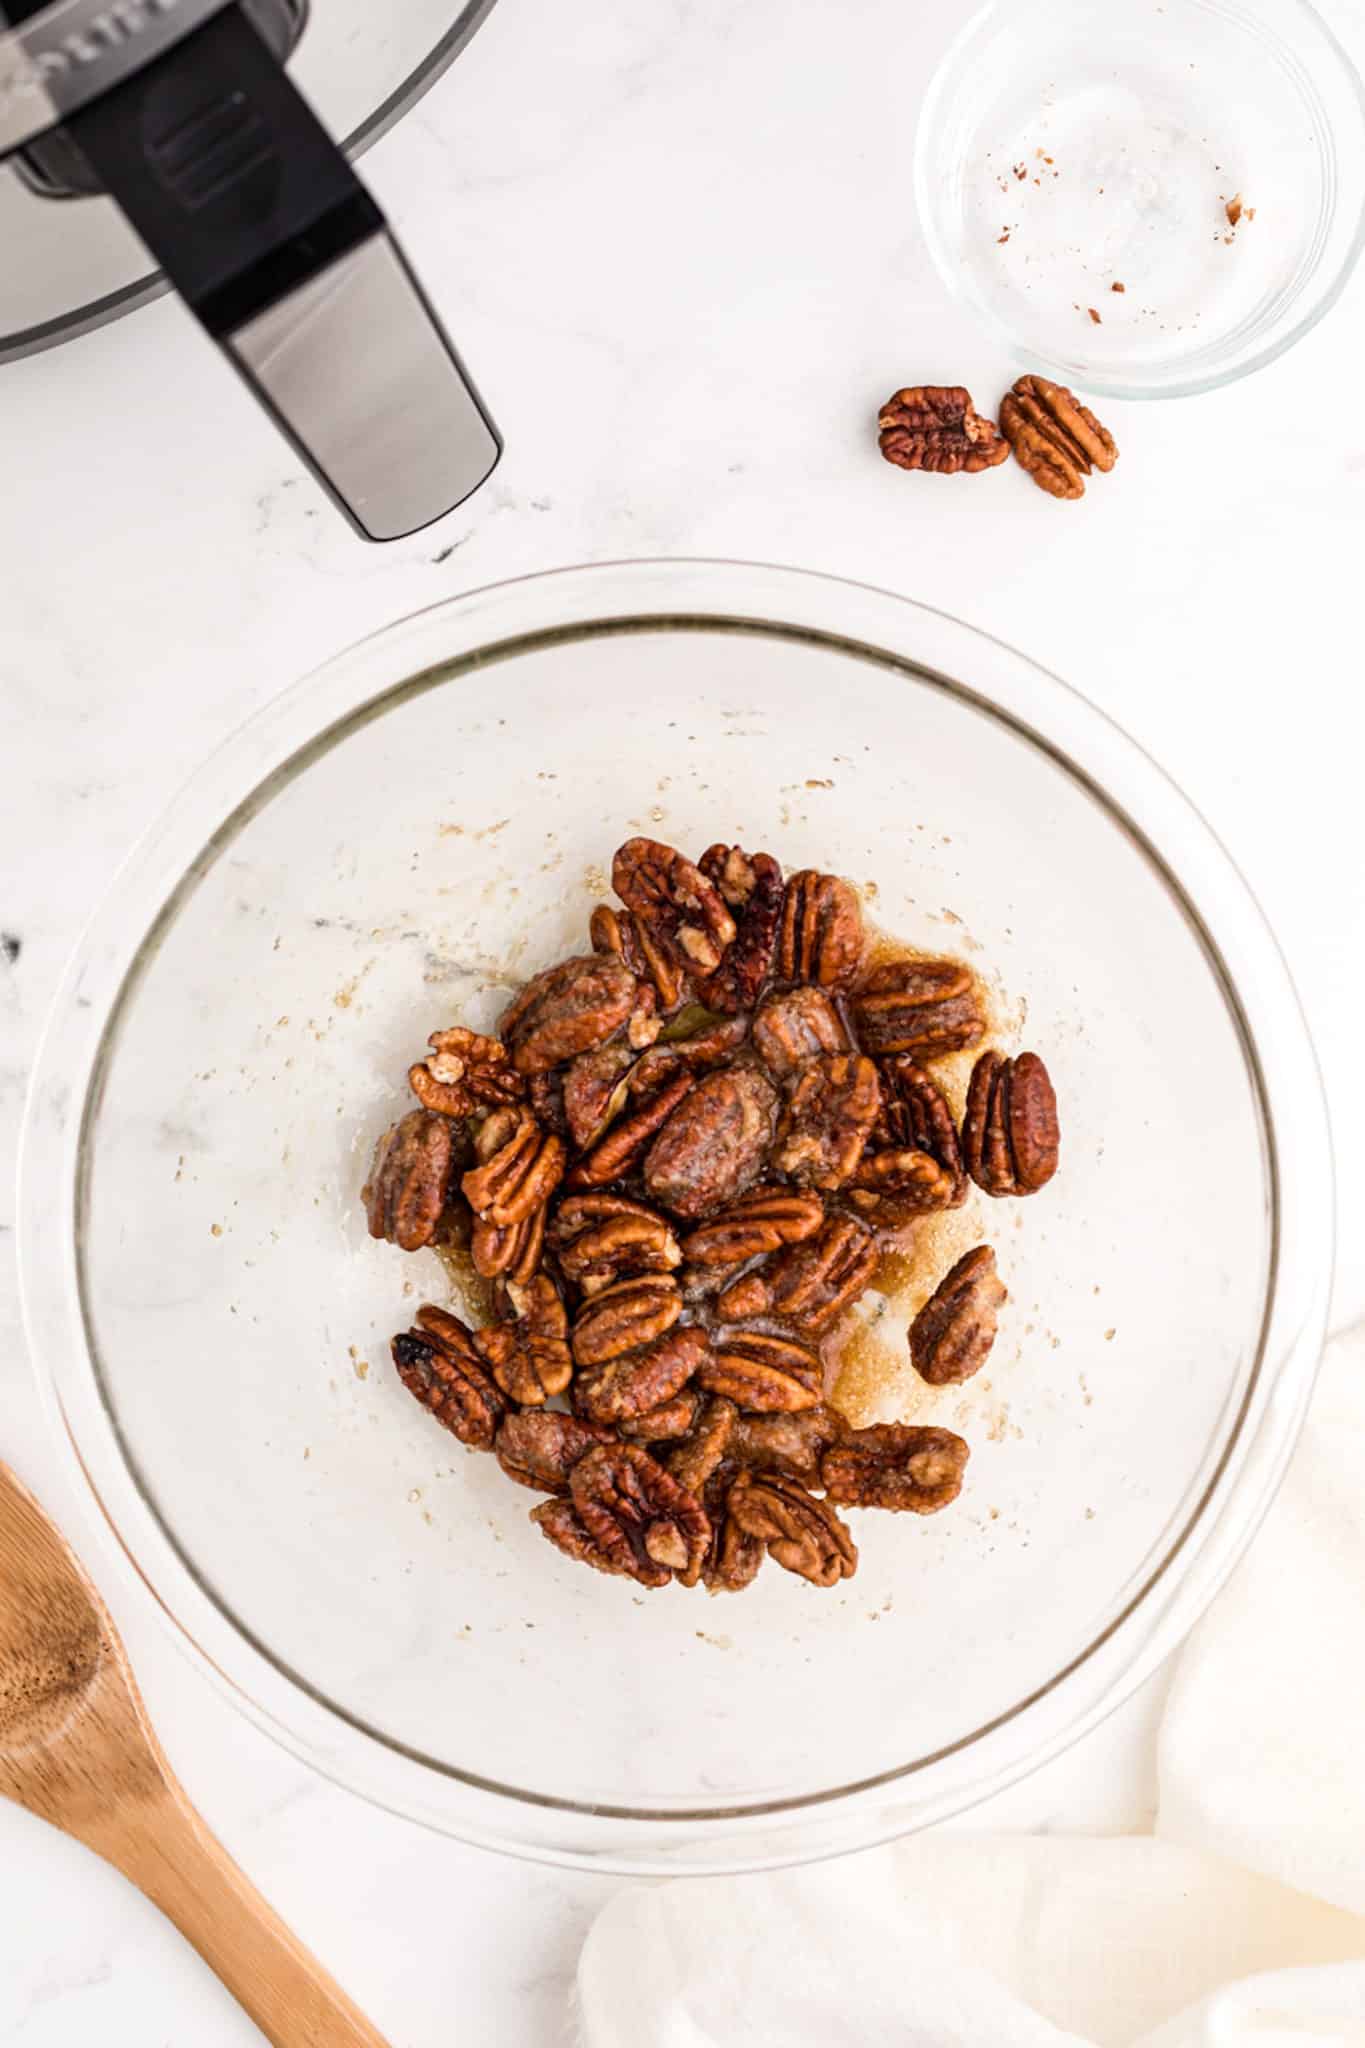 pecan and sugar mixture to make air fryer candied pecans.